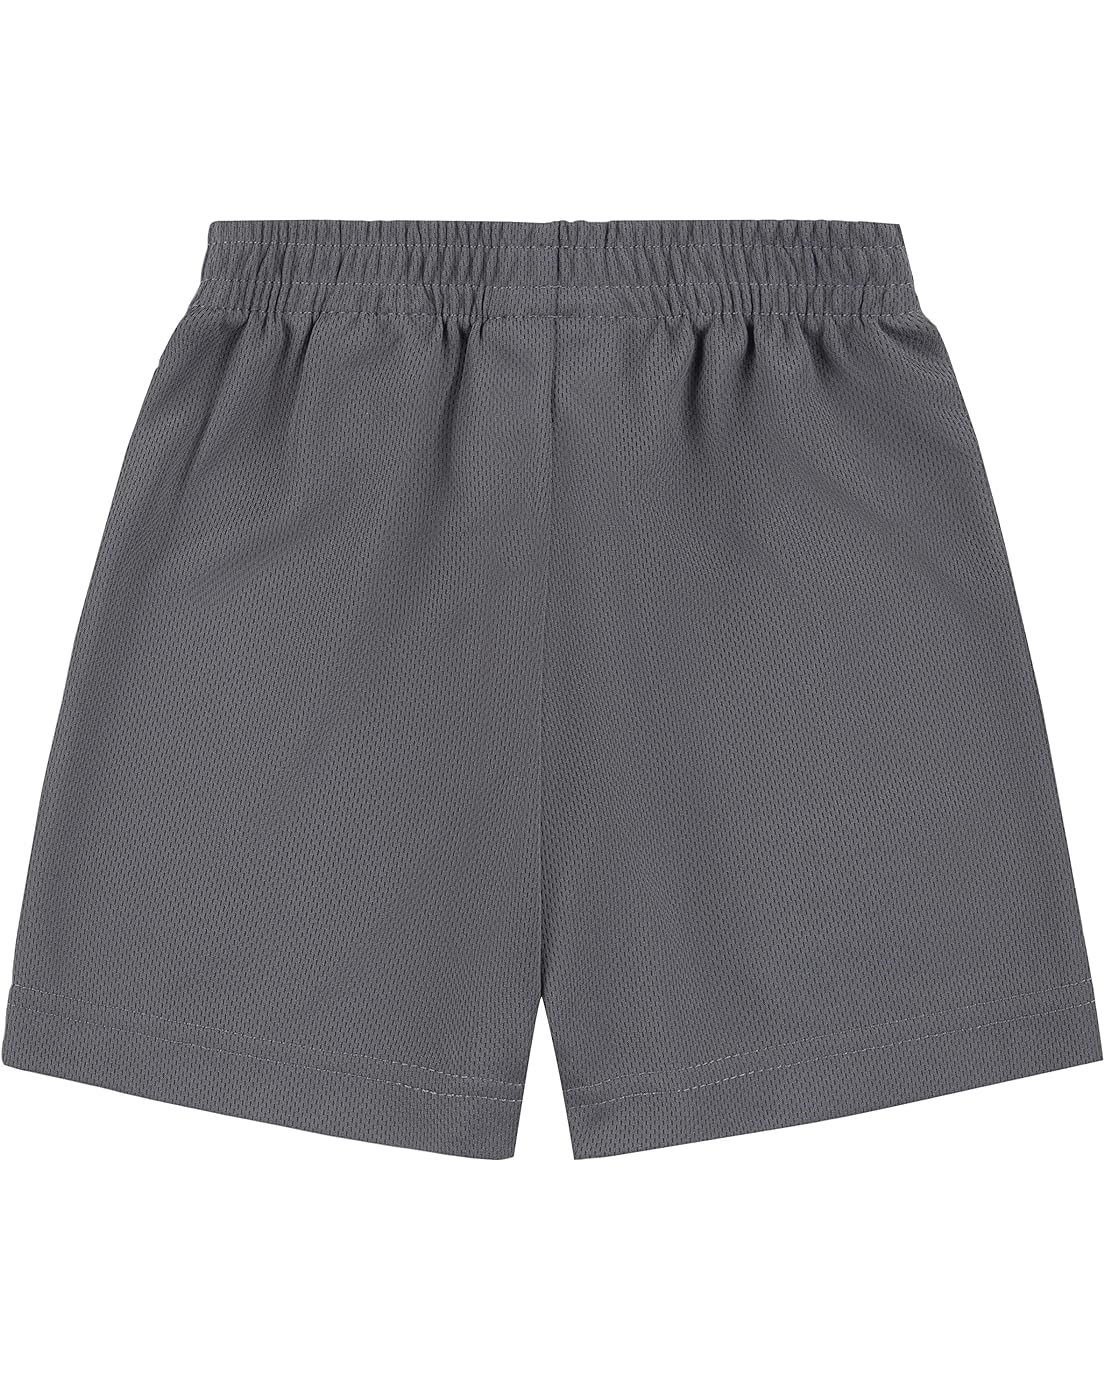  Nike 3BRAND Kids All For One Mesh Shorts (Toddler)